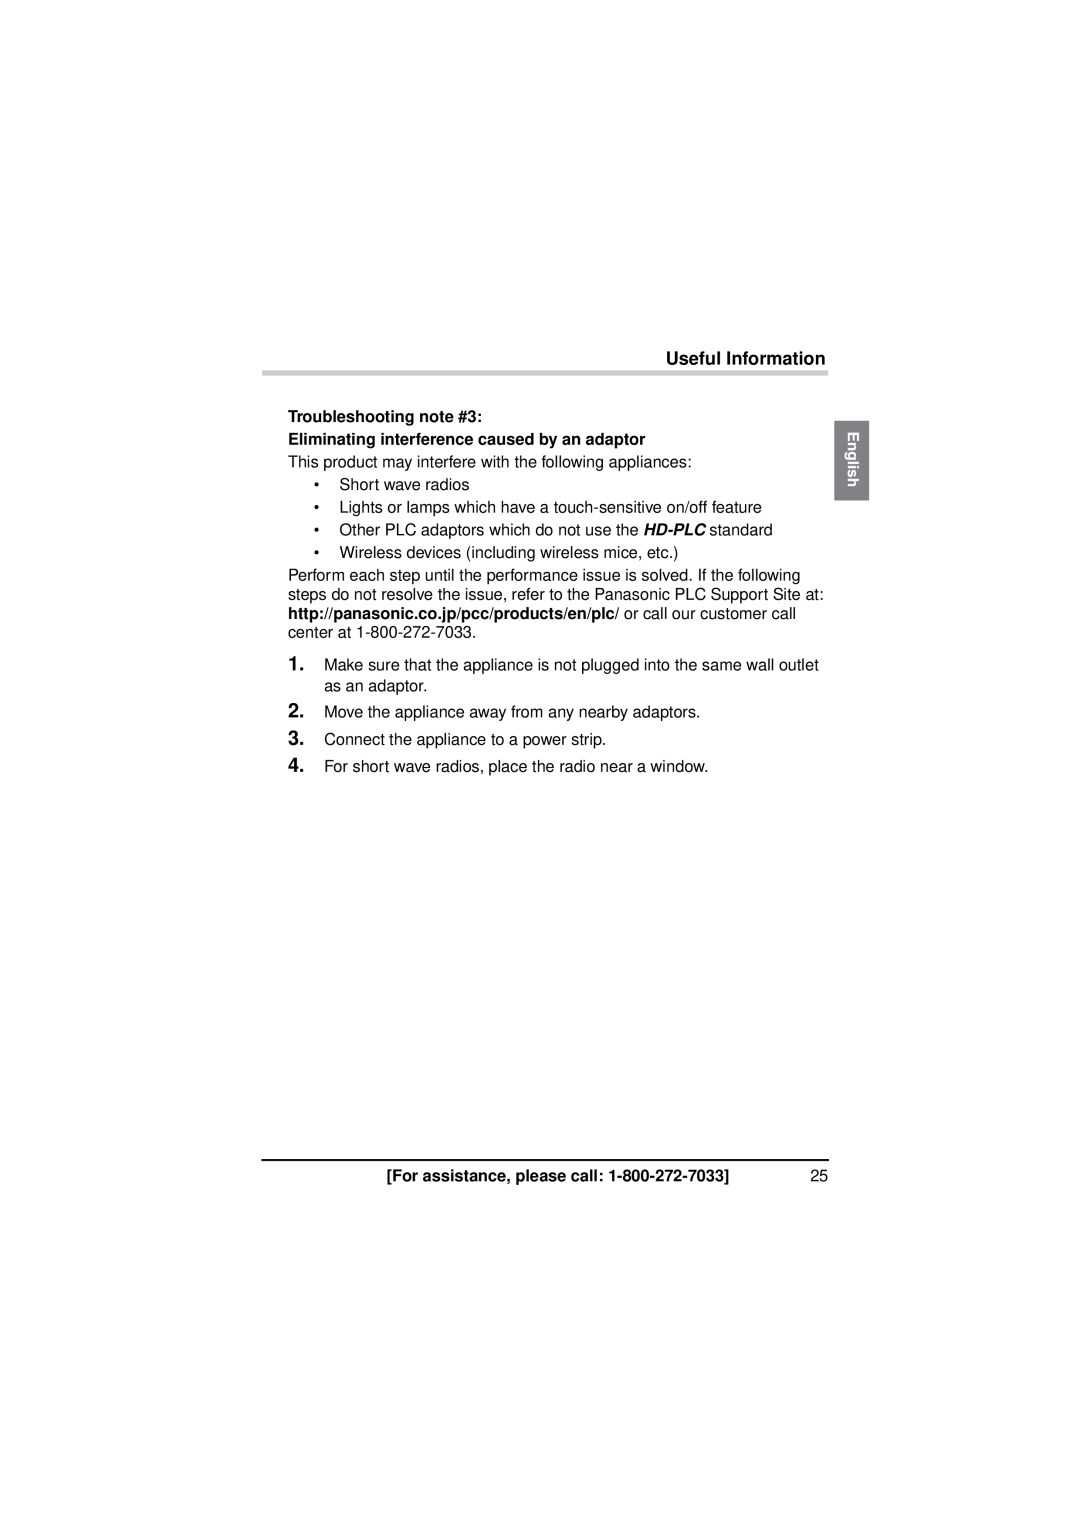 Panasonic BL-PA300KTA warranty Troubleshooting note #3 Eliminating interference caused by an adaptor, Useful Information 